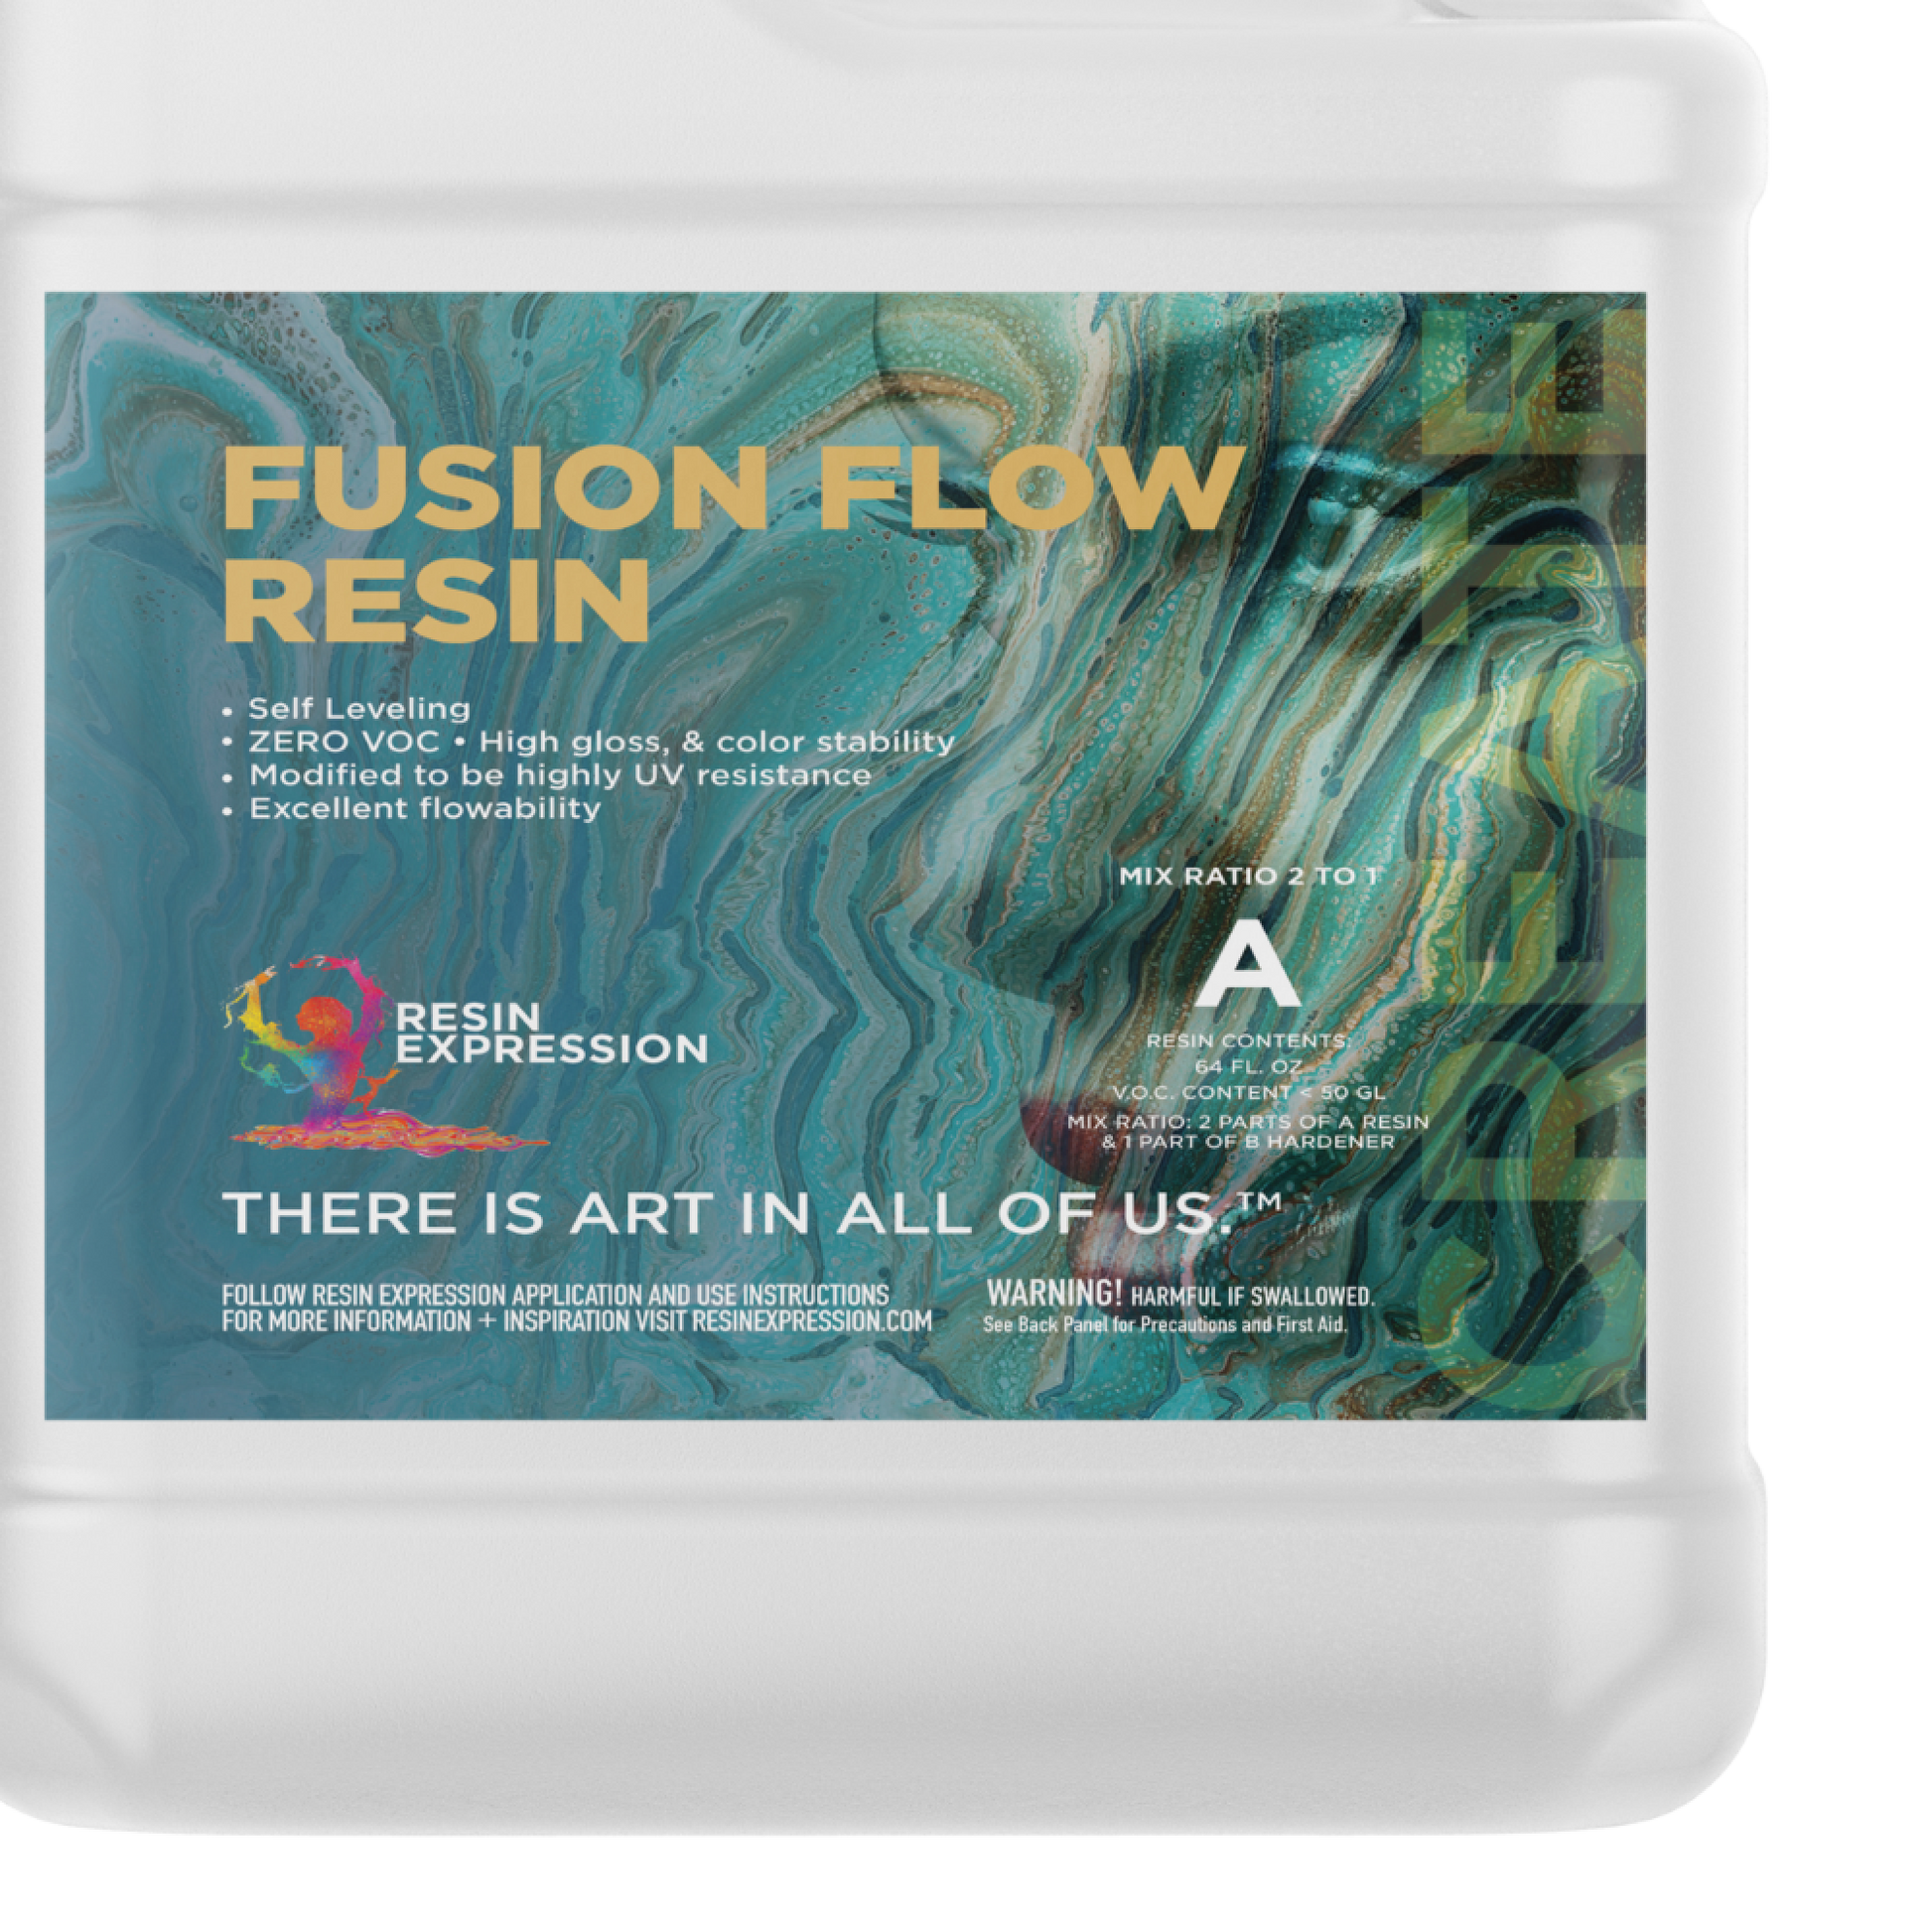 Creative Freedom: Explore new possibilities with Fusion Flow Resin